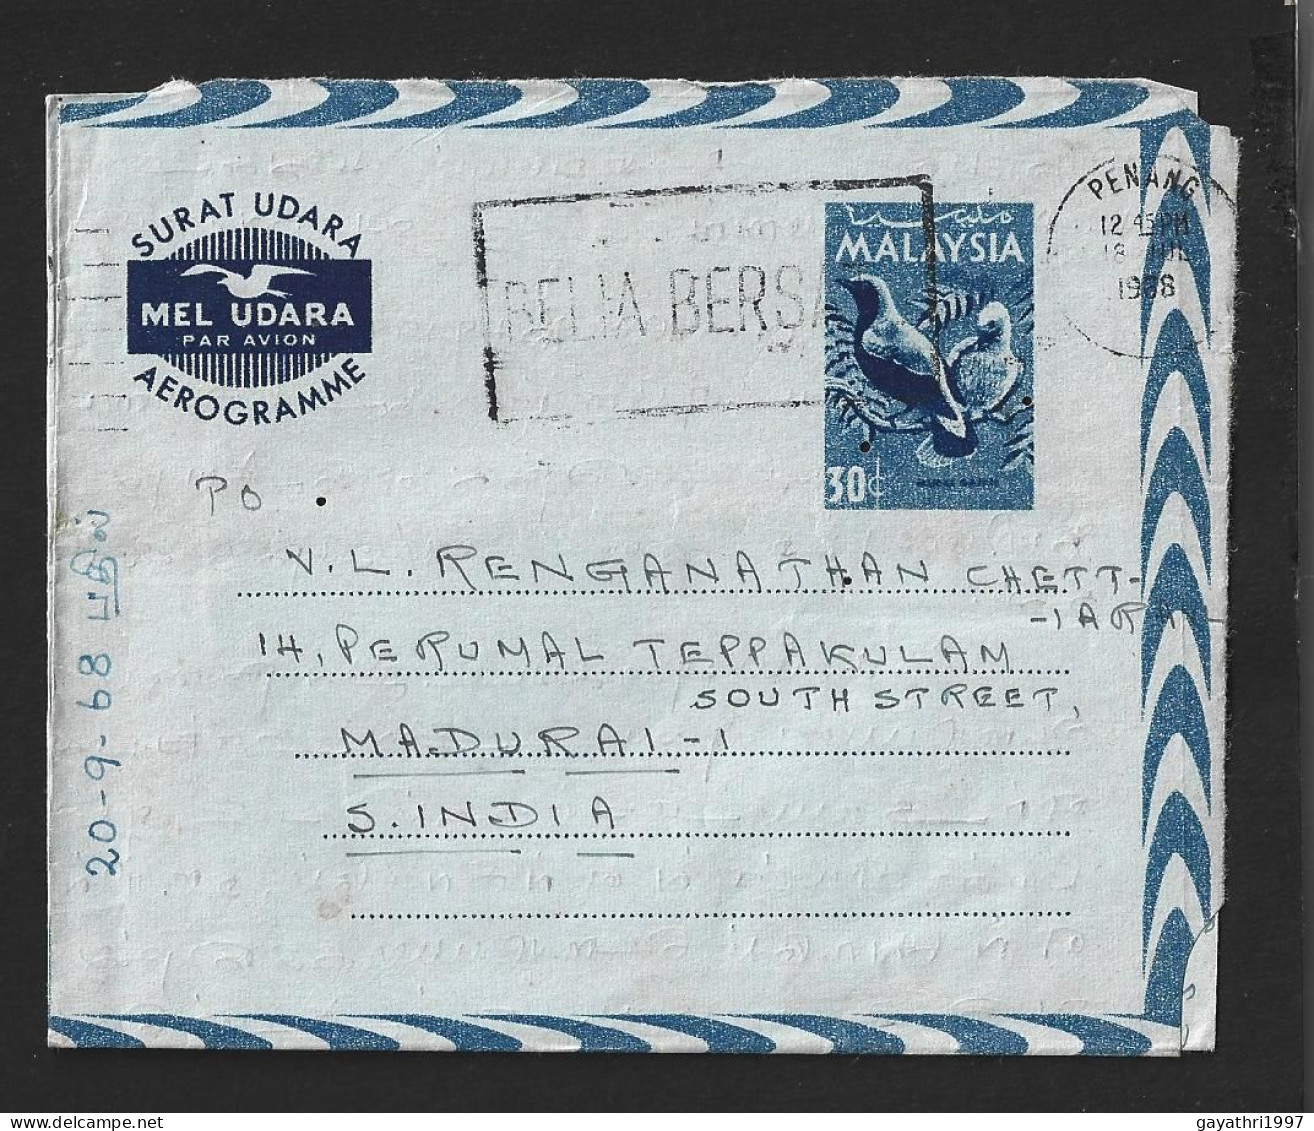 Malaysia Aerogramme From PENANG To India With Advertisement Cancellation 1968 (B20) - Malaysia (1964-...)